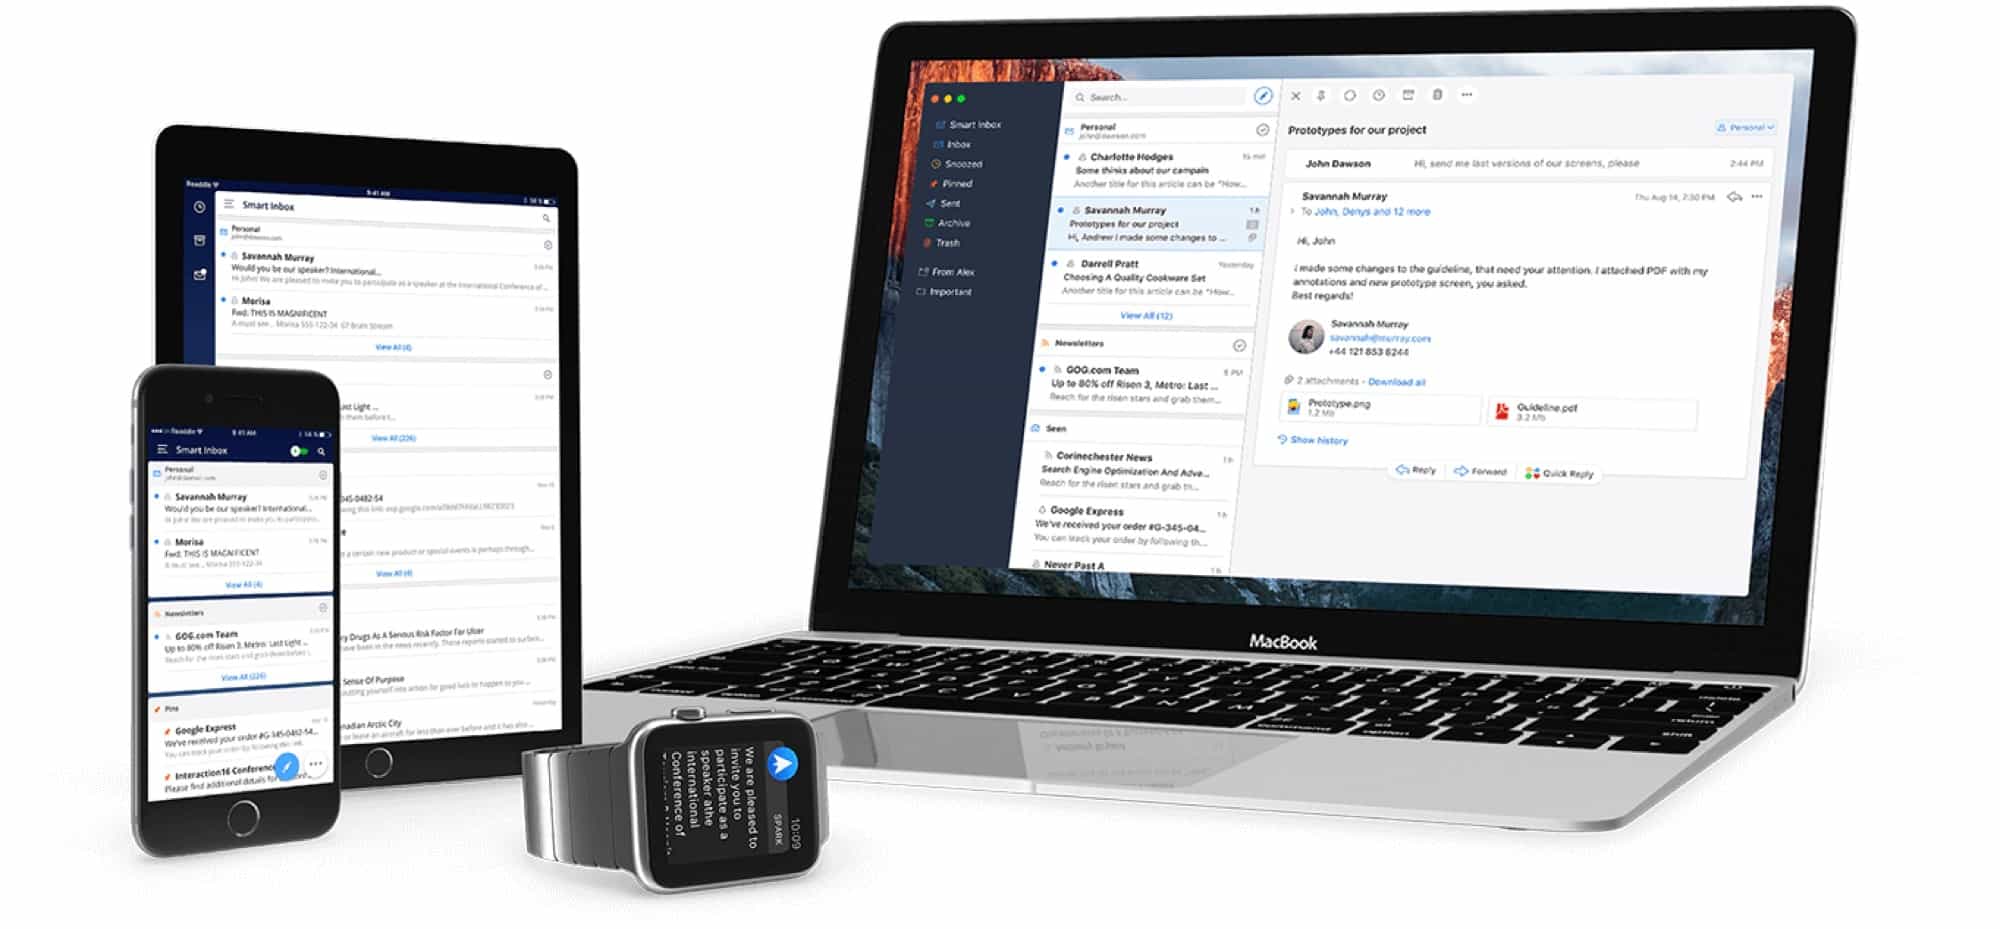 spark email client for mac